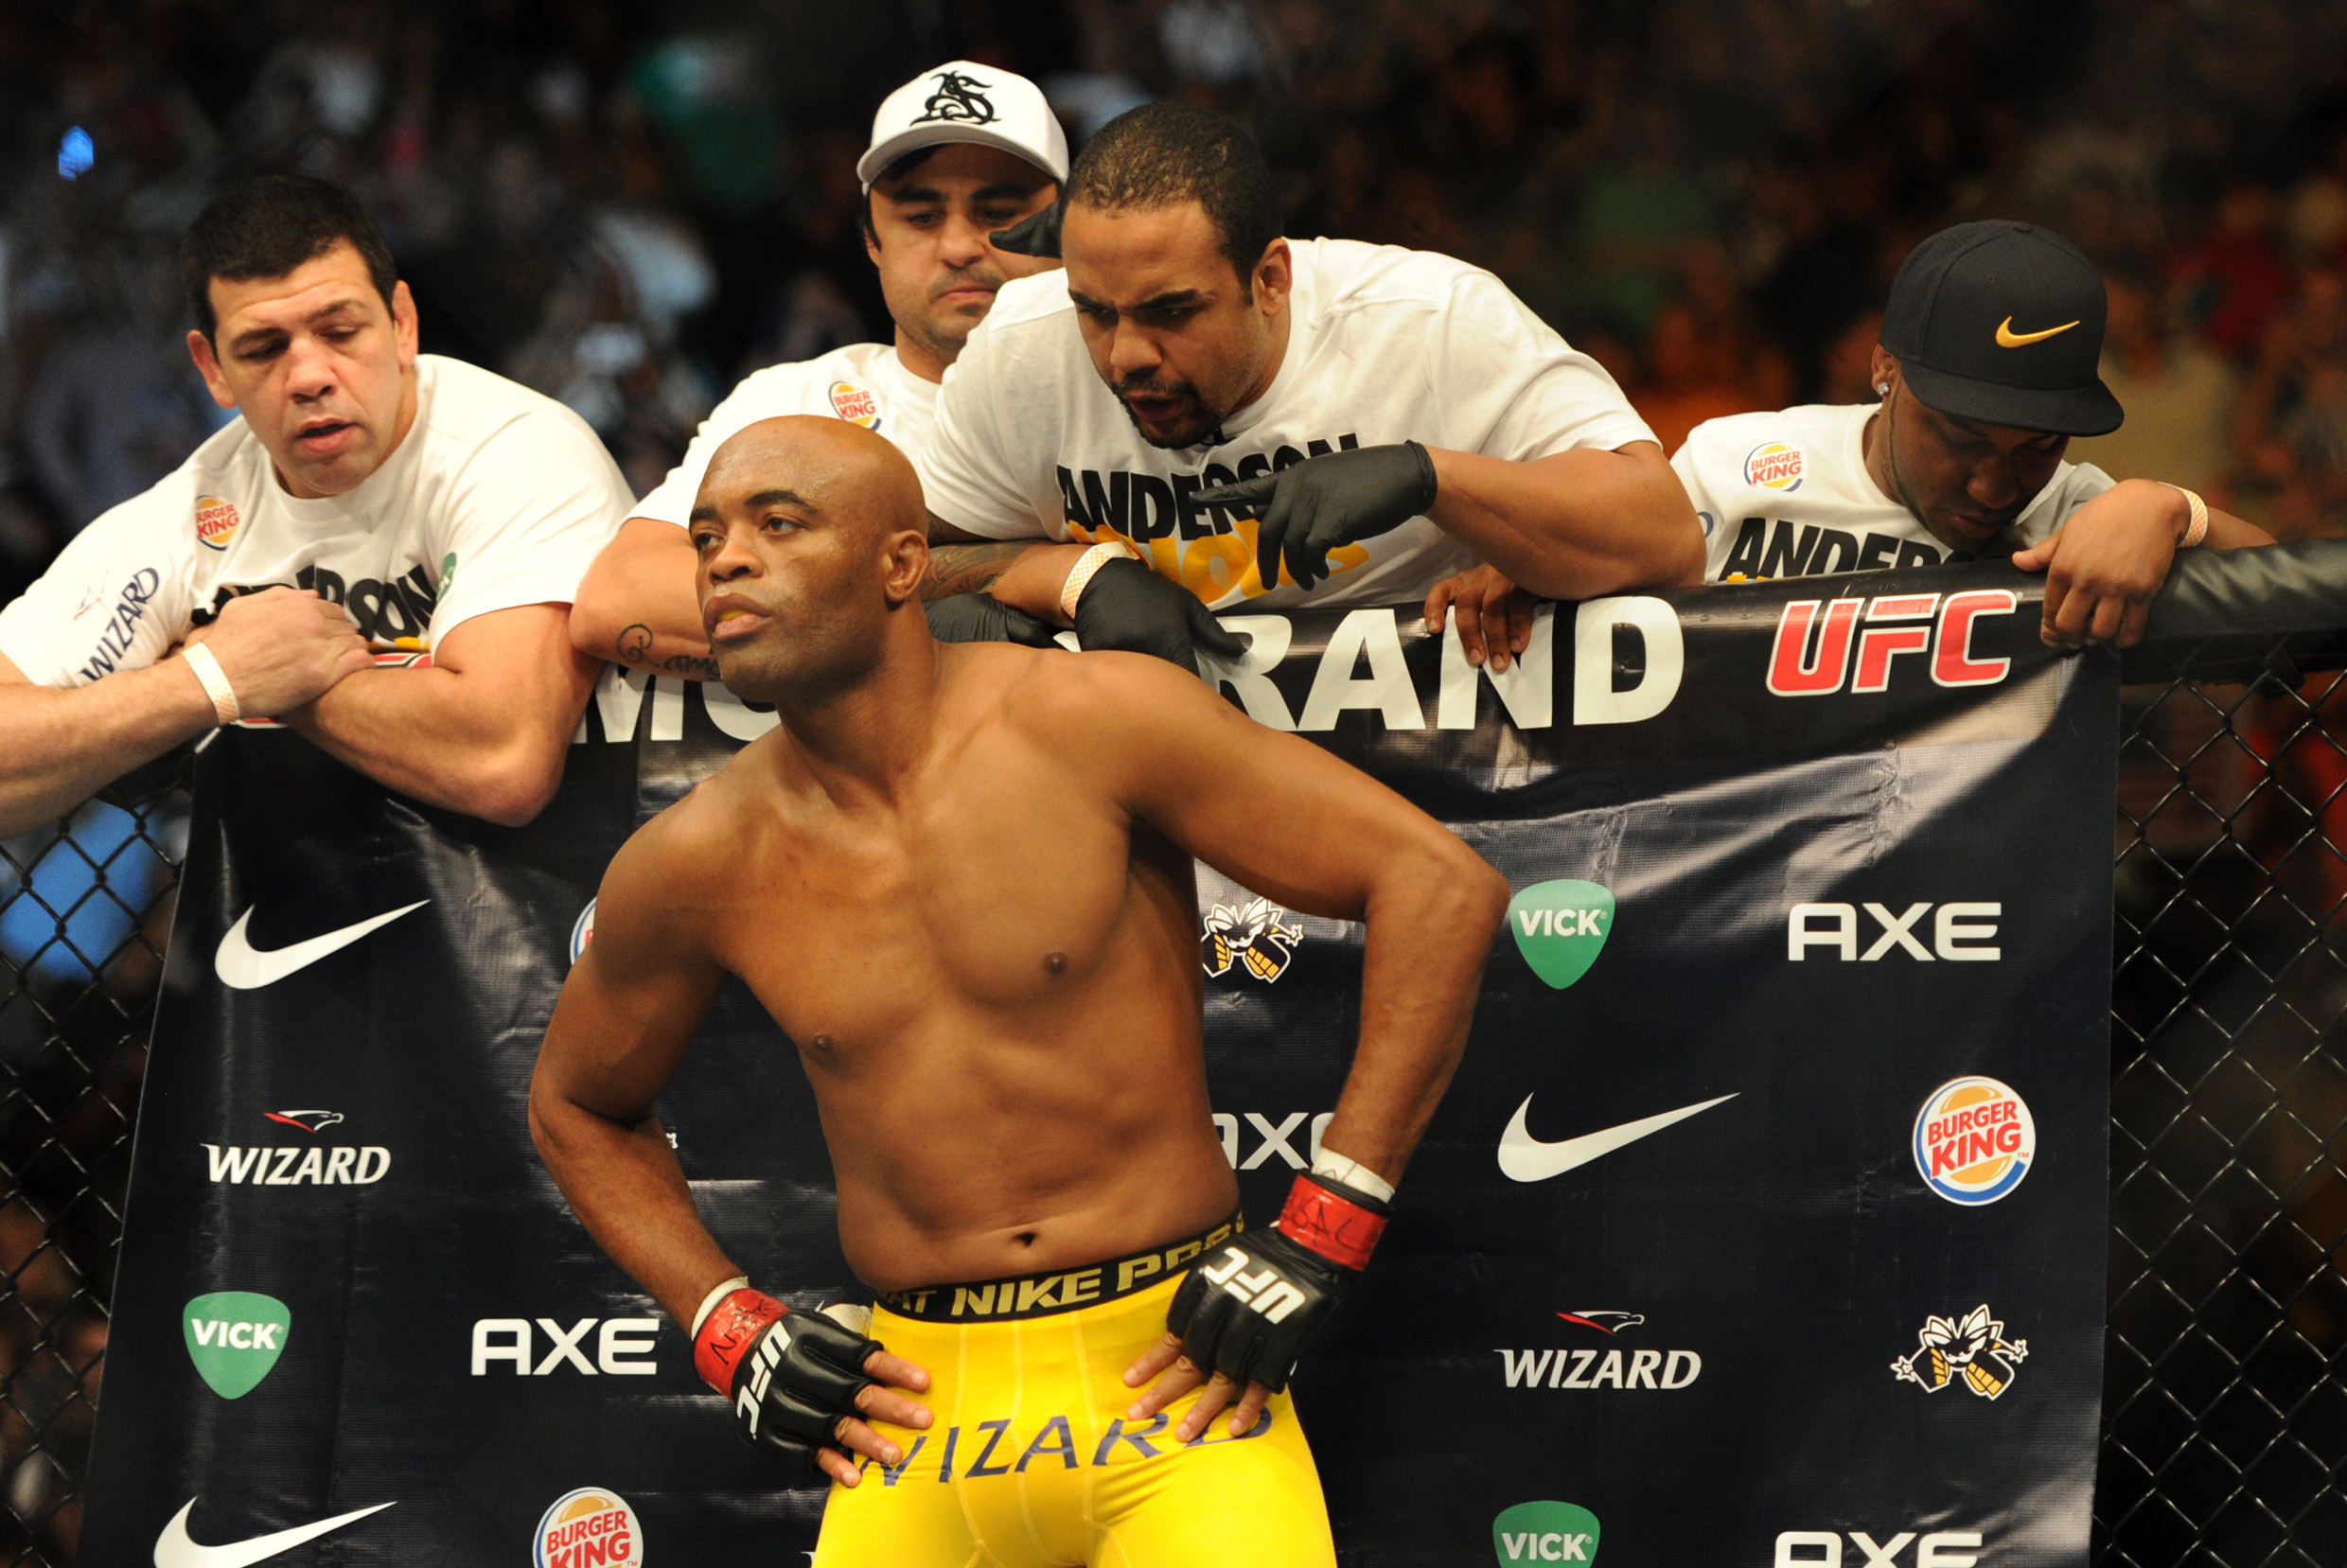 UFC - And that's why Anderson 'The Spider' Silva's been nominated for a  Fighter of the Year ESPY. Cast your vote